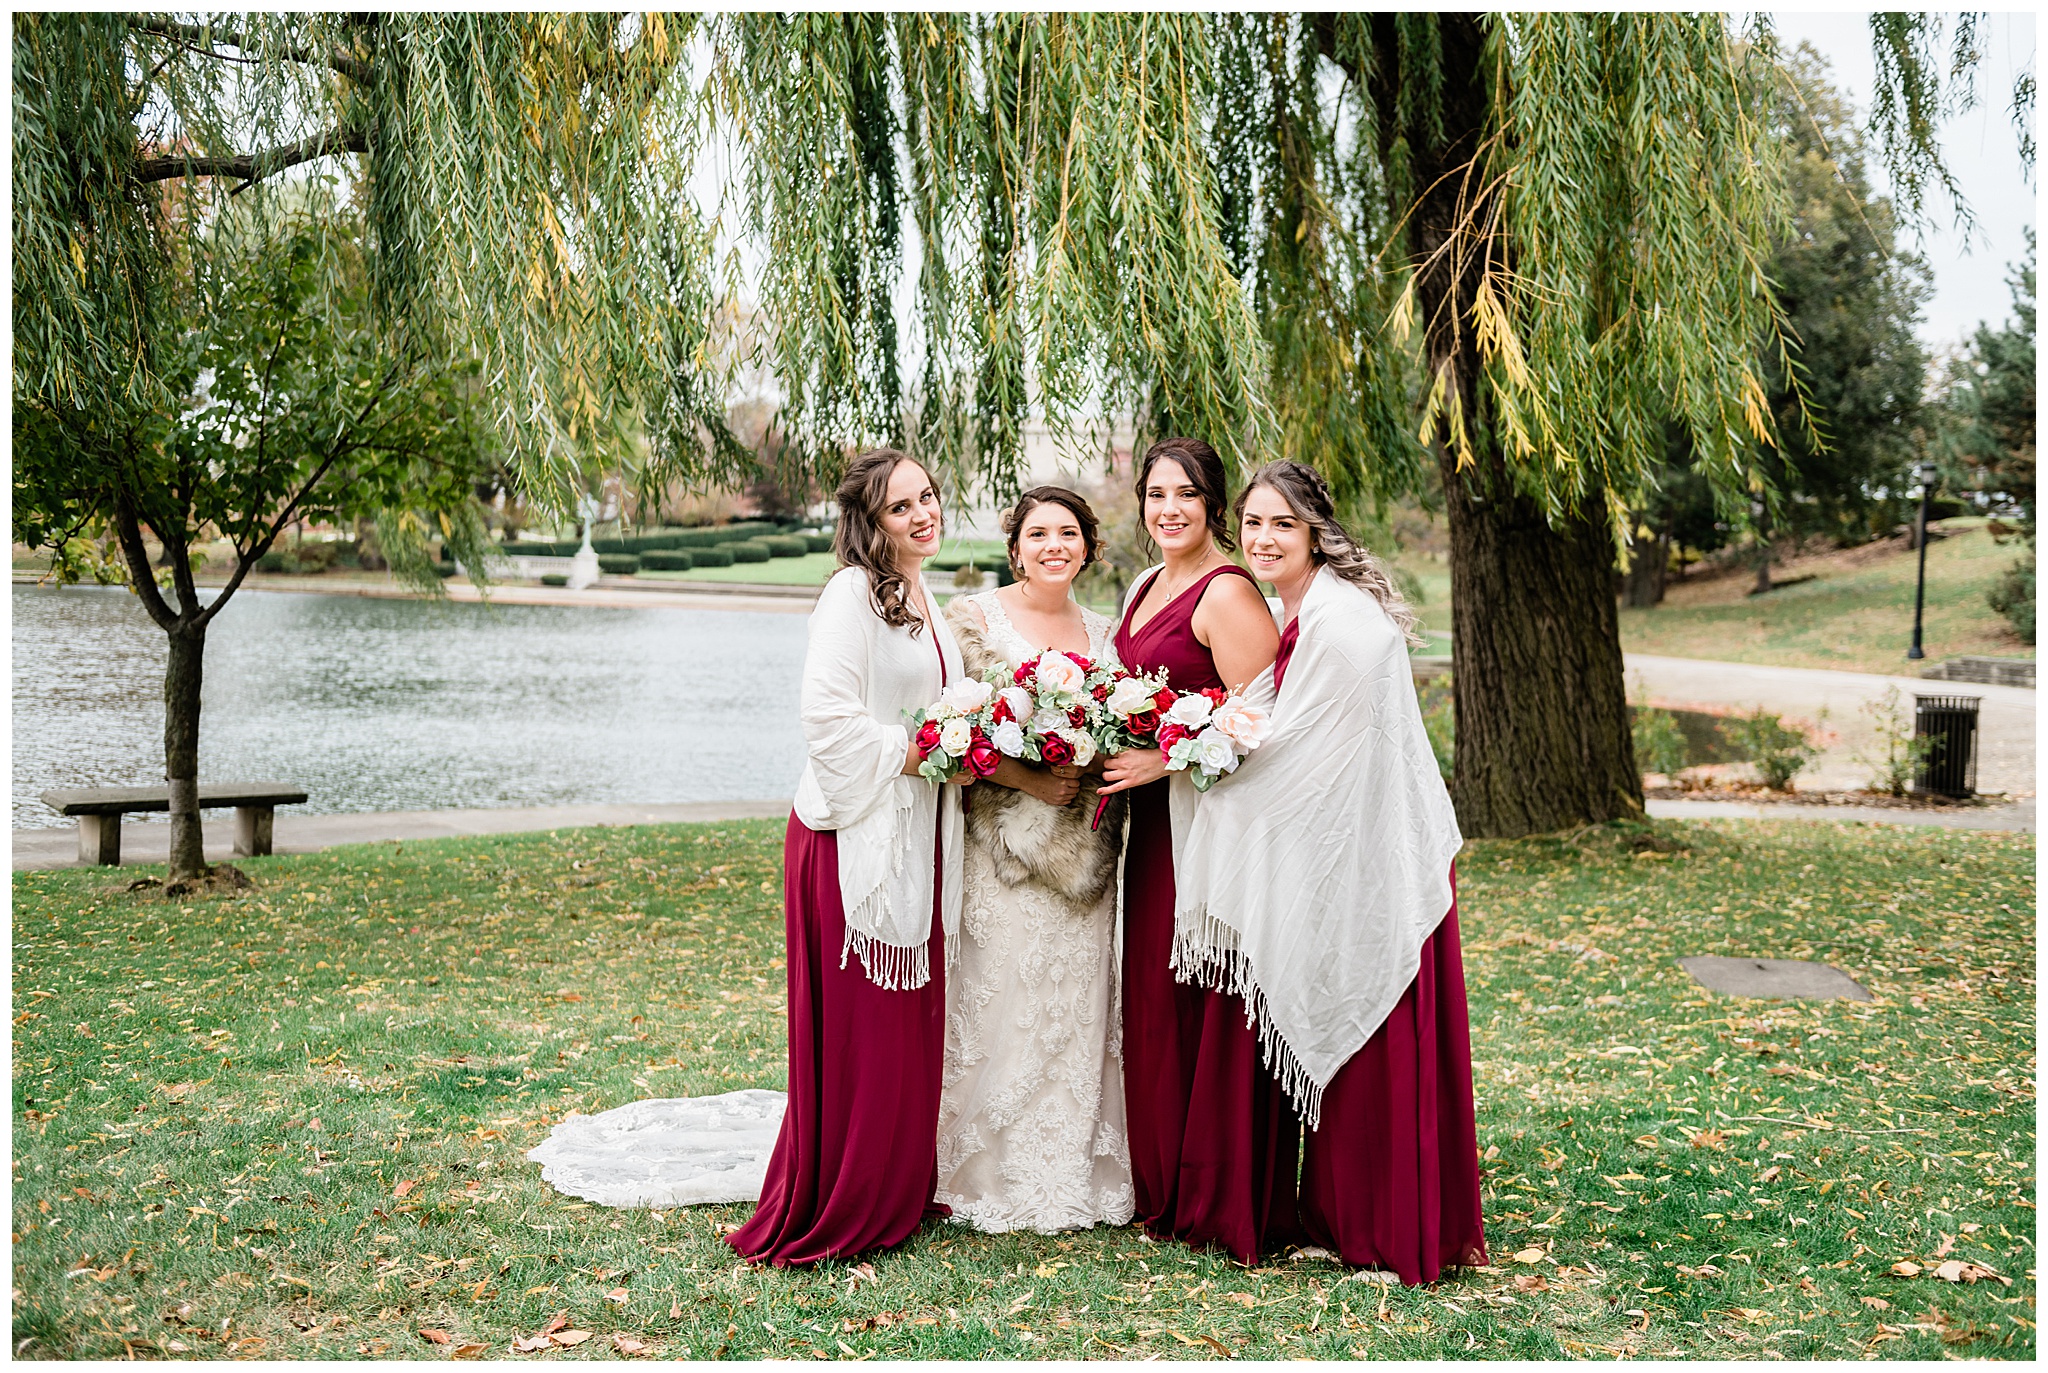 BRIDESMAIDS UNDER A WEEPING WILLOW